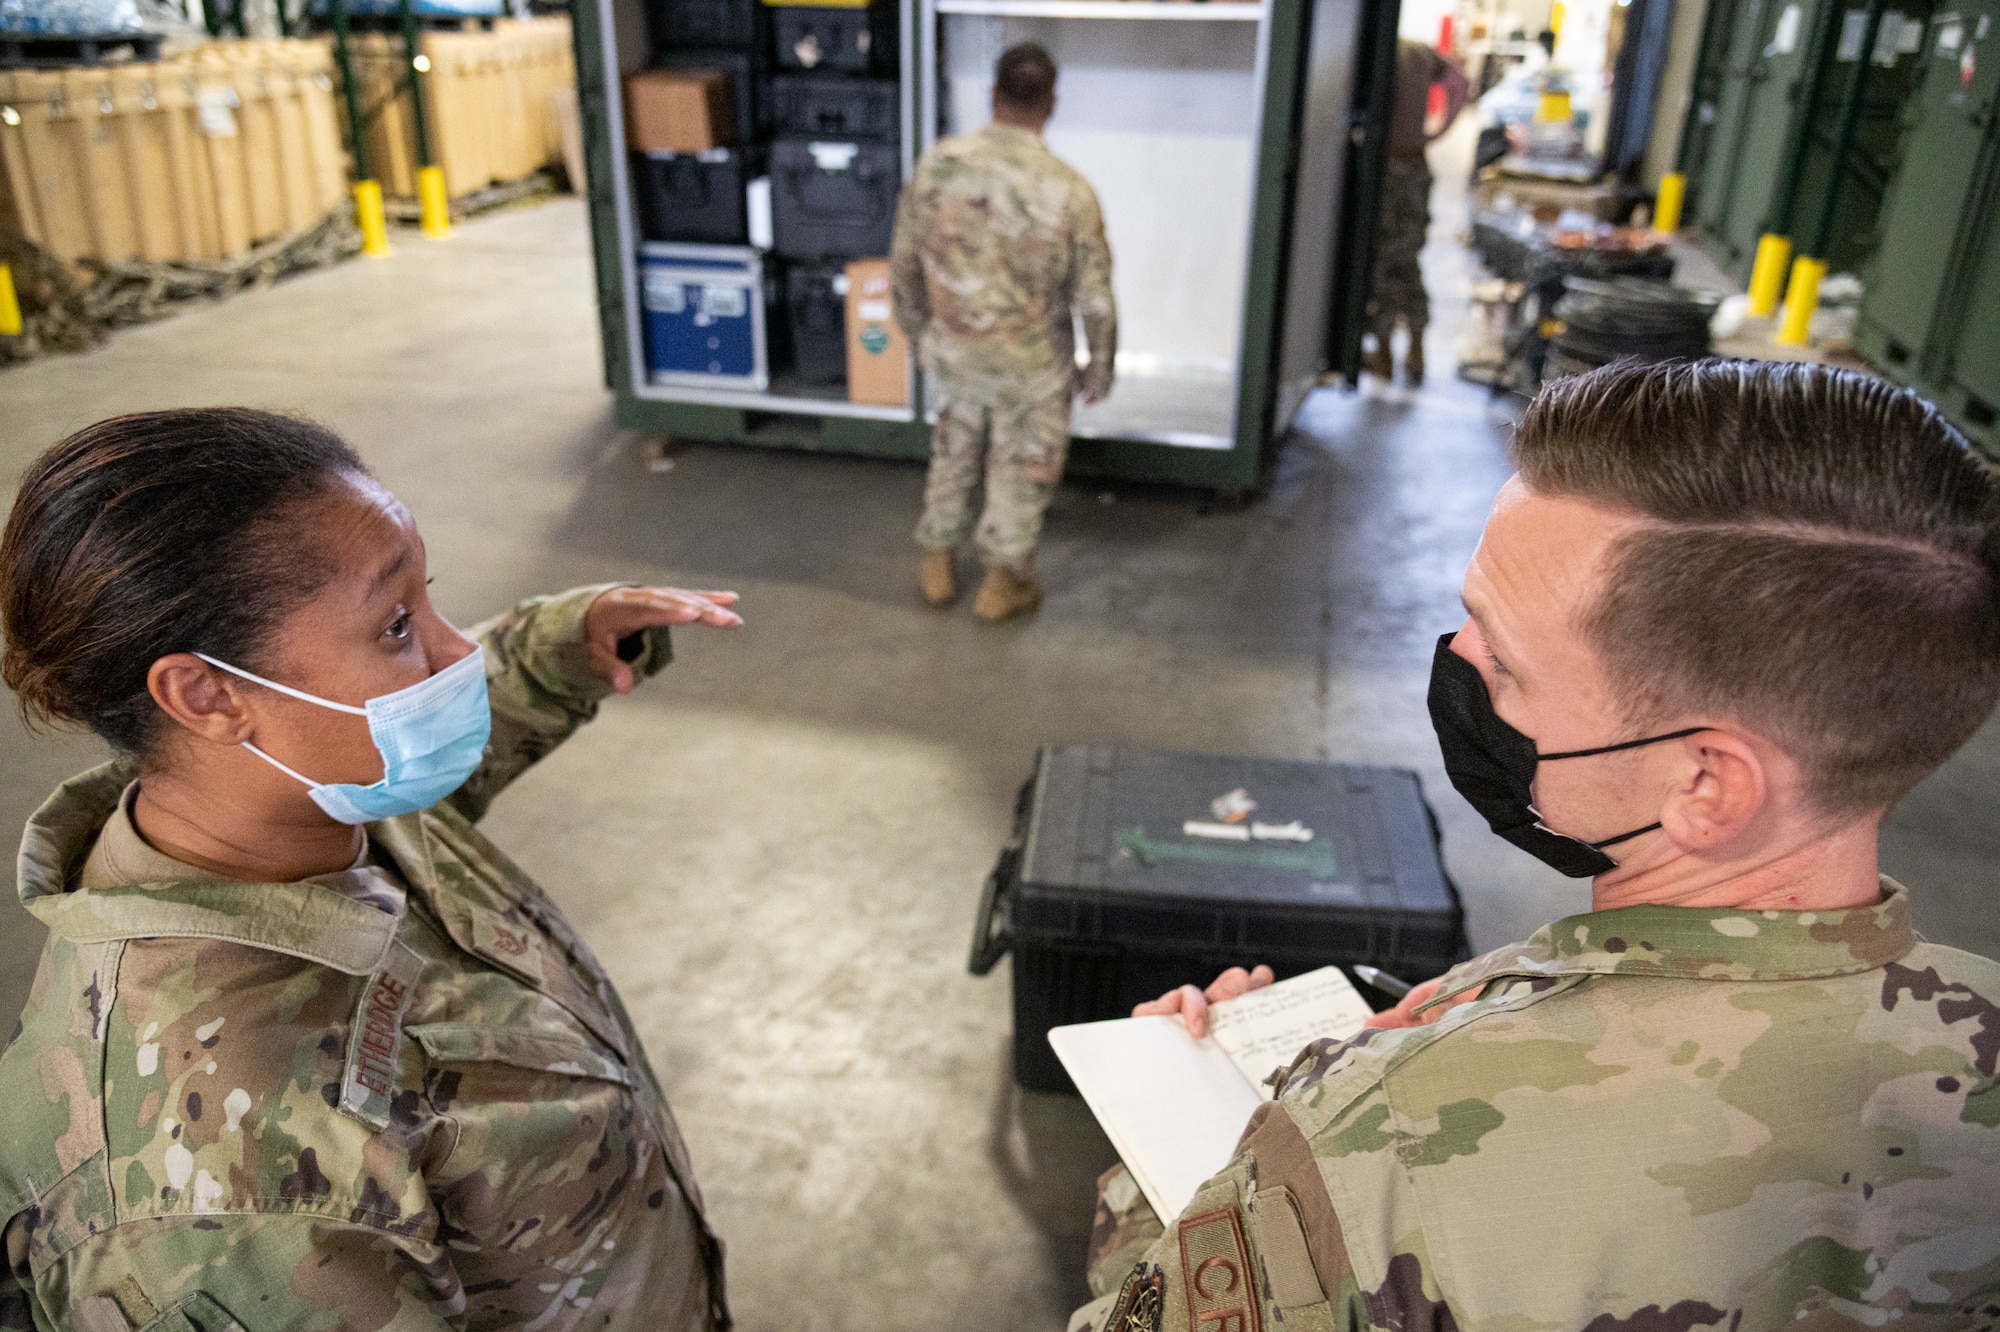 U.S. Air Force Tech. Sgt. Angela Etheridge, 821st Contingency Response Squadron aerial porter, and Tech. Sgt. Jacob Anderson, 621st Contingency Response Group unit type- code manager, discuss how to utilize space for an additional UTC Oct. 8, 2021, at Joint Base McGuire-Dix-Lakehurst, New Jersey. The 621st Contingency Response Wing is accelerating change
by adding another CR squadron to the 821st CRG at Travis Air Force Base, California, and the 621st CRG at JBMDL. (U.S. Air Force photo by Staff Sgt. Sarah Brice)